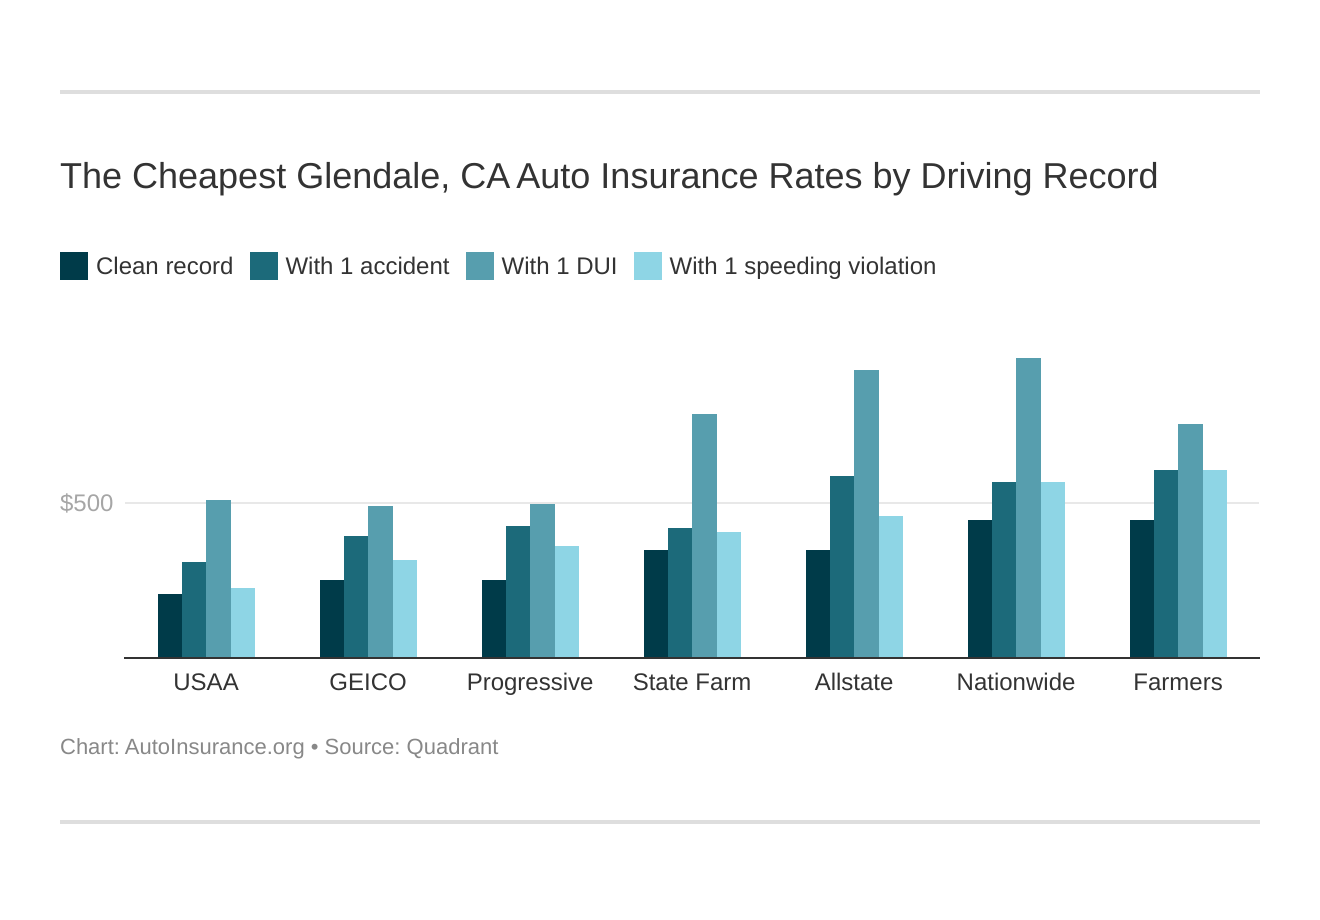 The Cheapest Glendale, CA Auto Insurance Rates by Driving Record